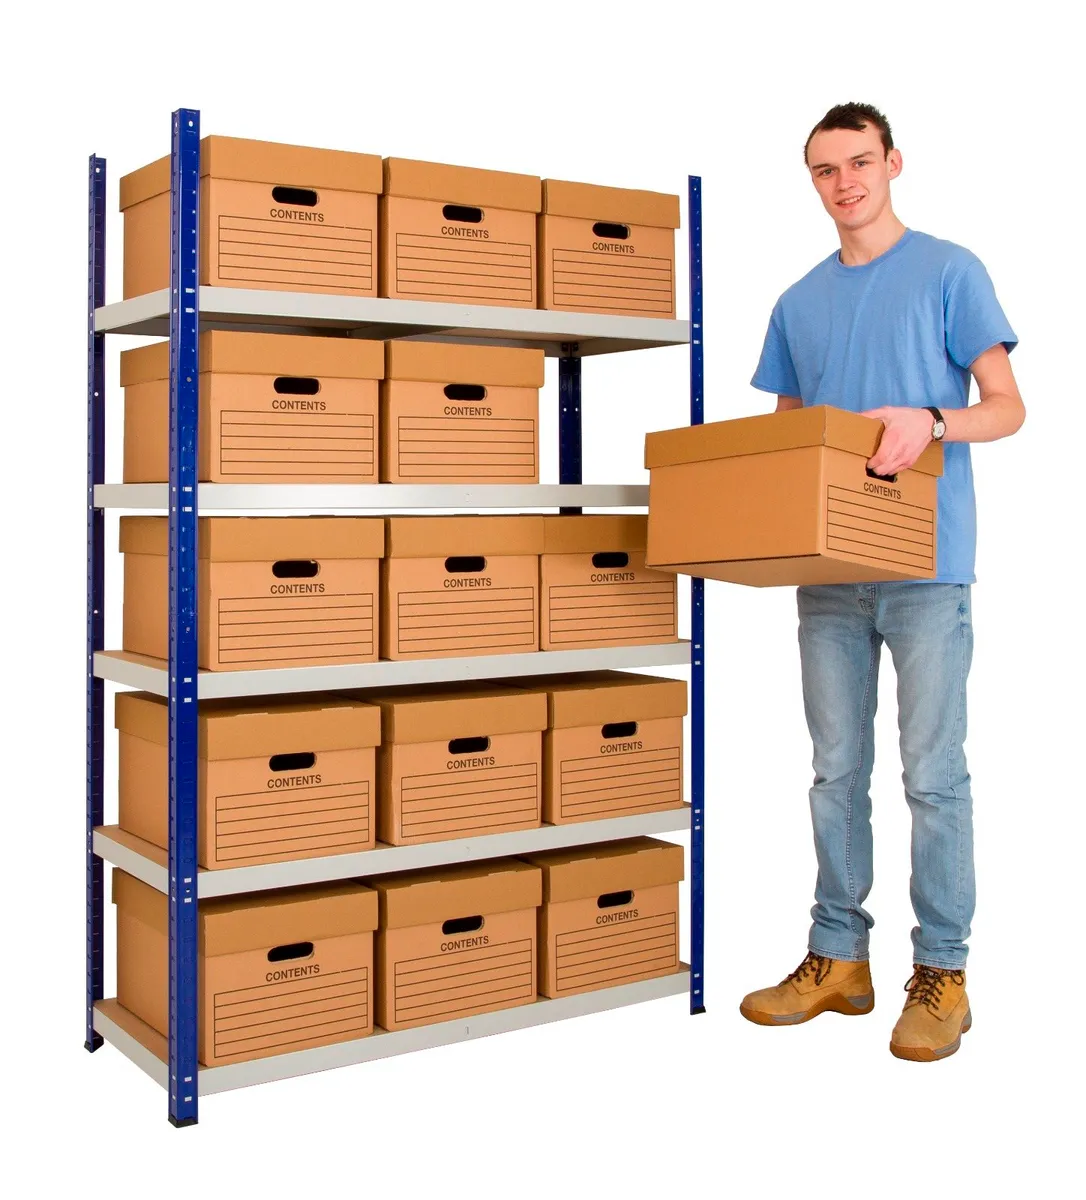 Container Shelving from €40 + vat